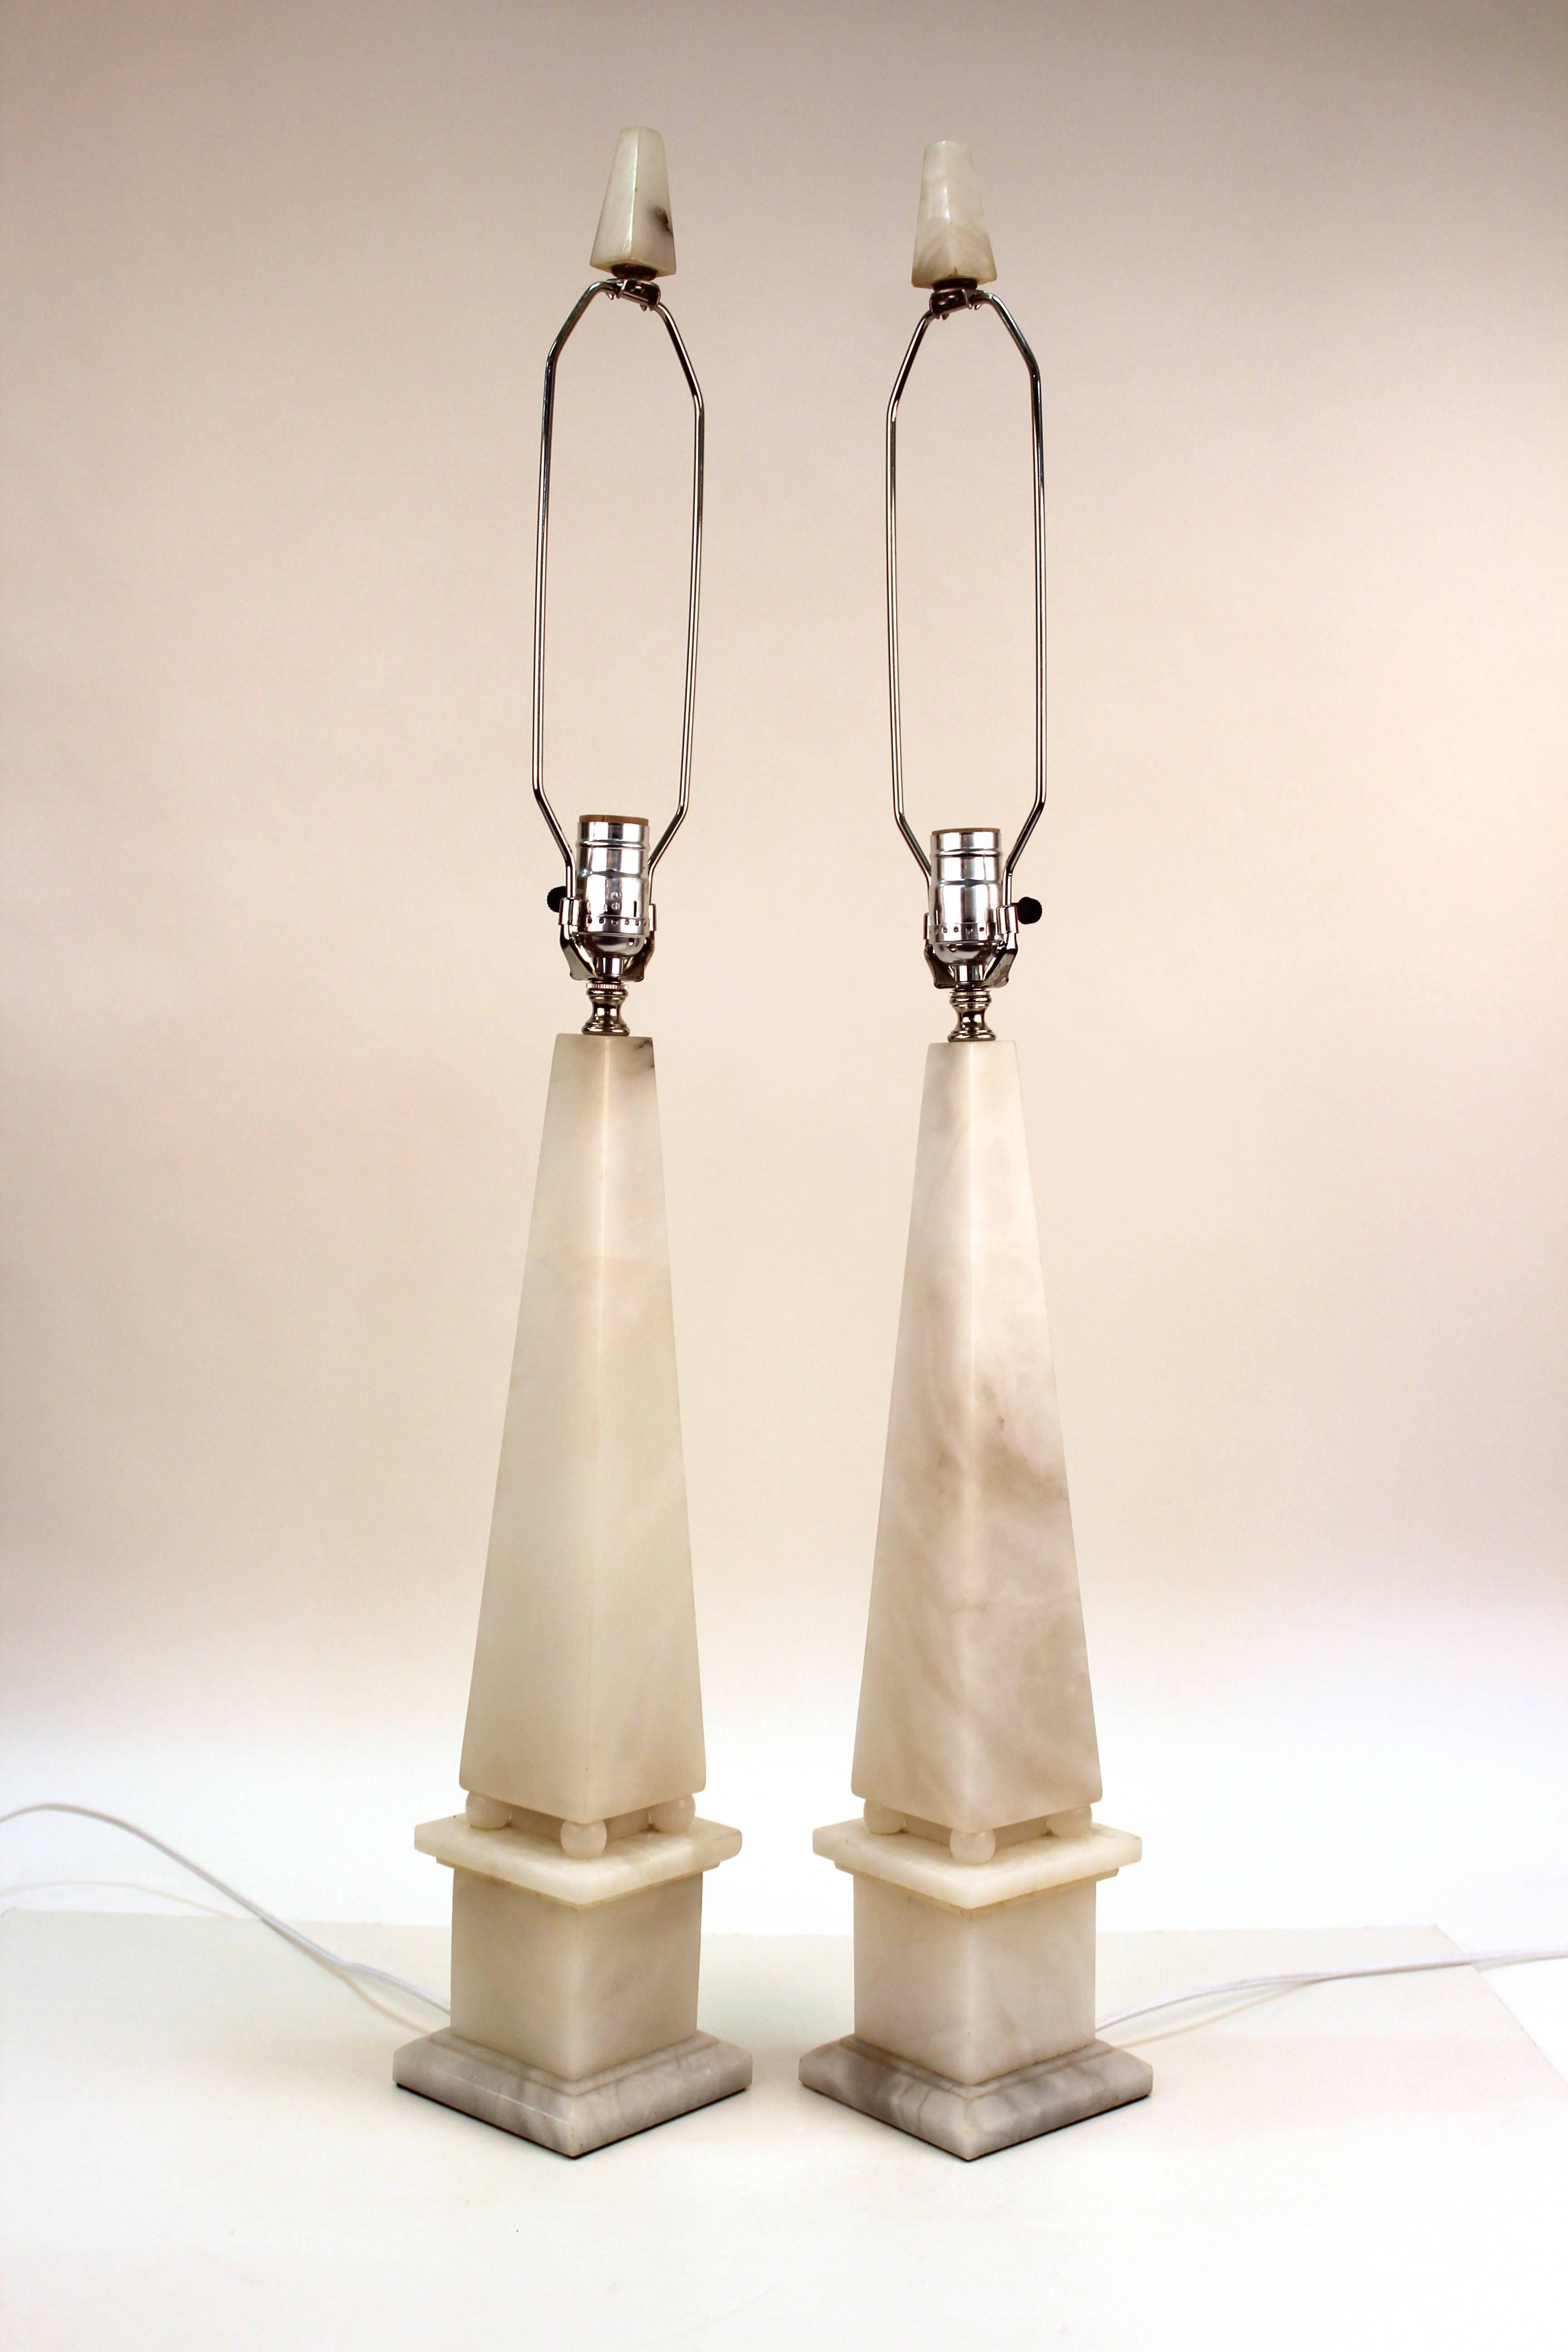 Pair of column lamps in alabaster. Crafted in the form of obelisks with original alabaster finials. Produced in Italy during the Mid-20th Century. The pair are in excellent condition with new silk wiring and sockets. 